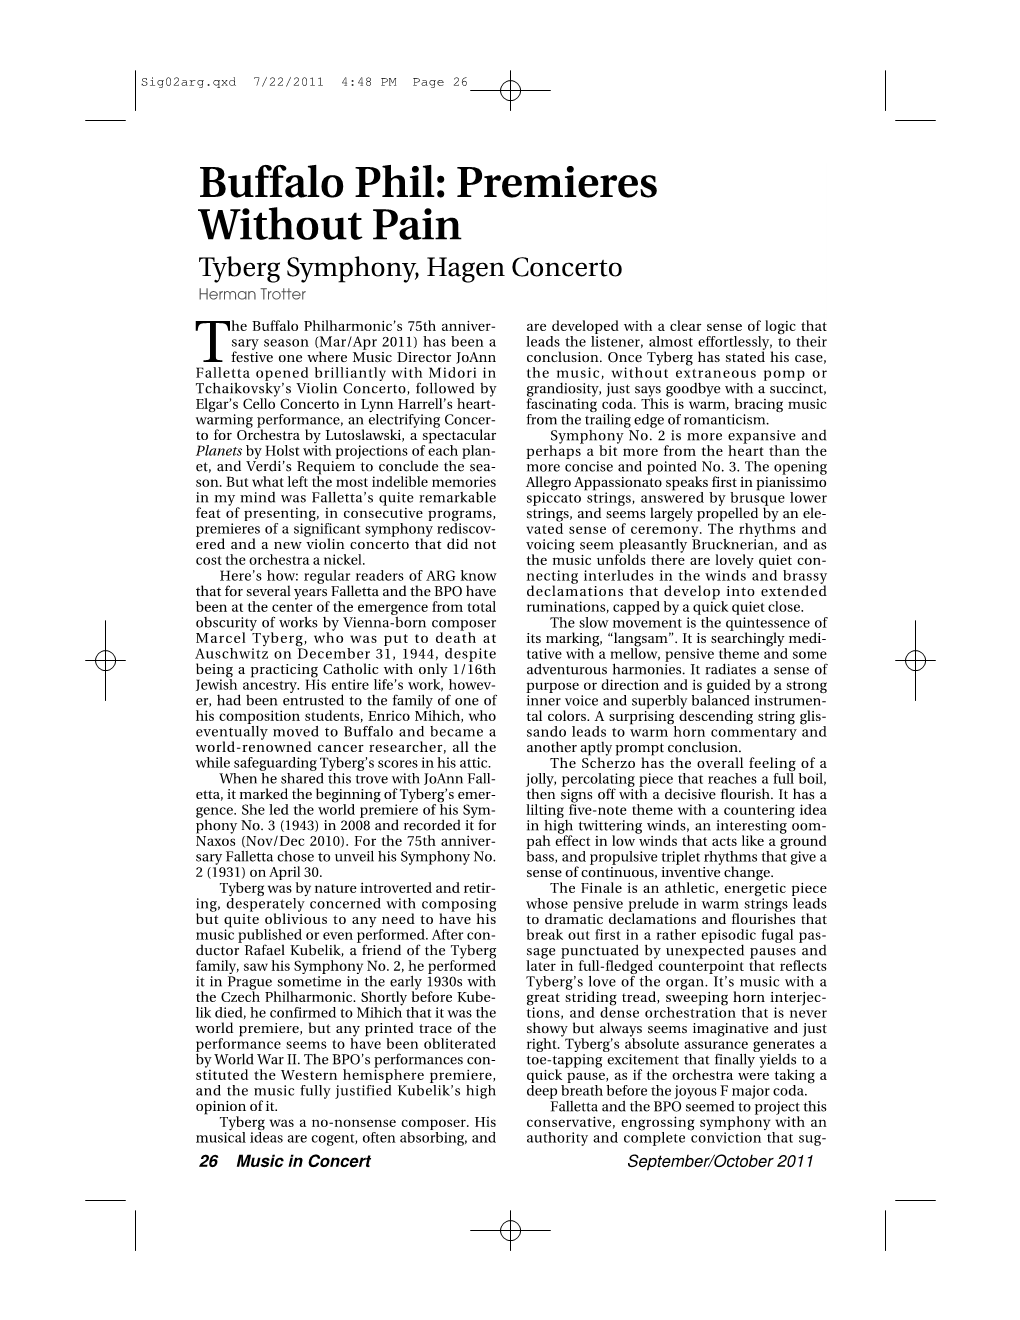 Buffalo Phil: Premieres Without Pain Tyberg Symphony, Hagen Concerto Herman Trotter